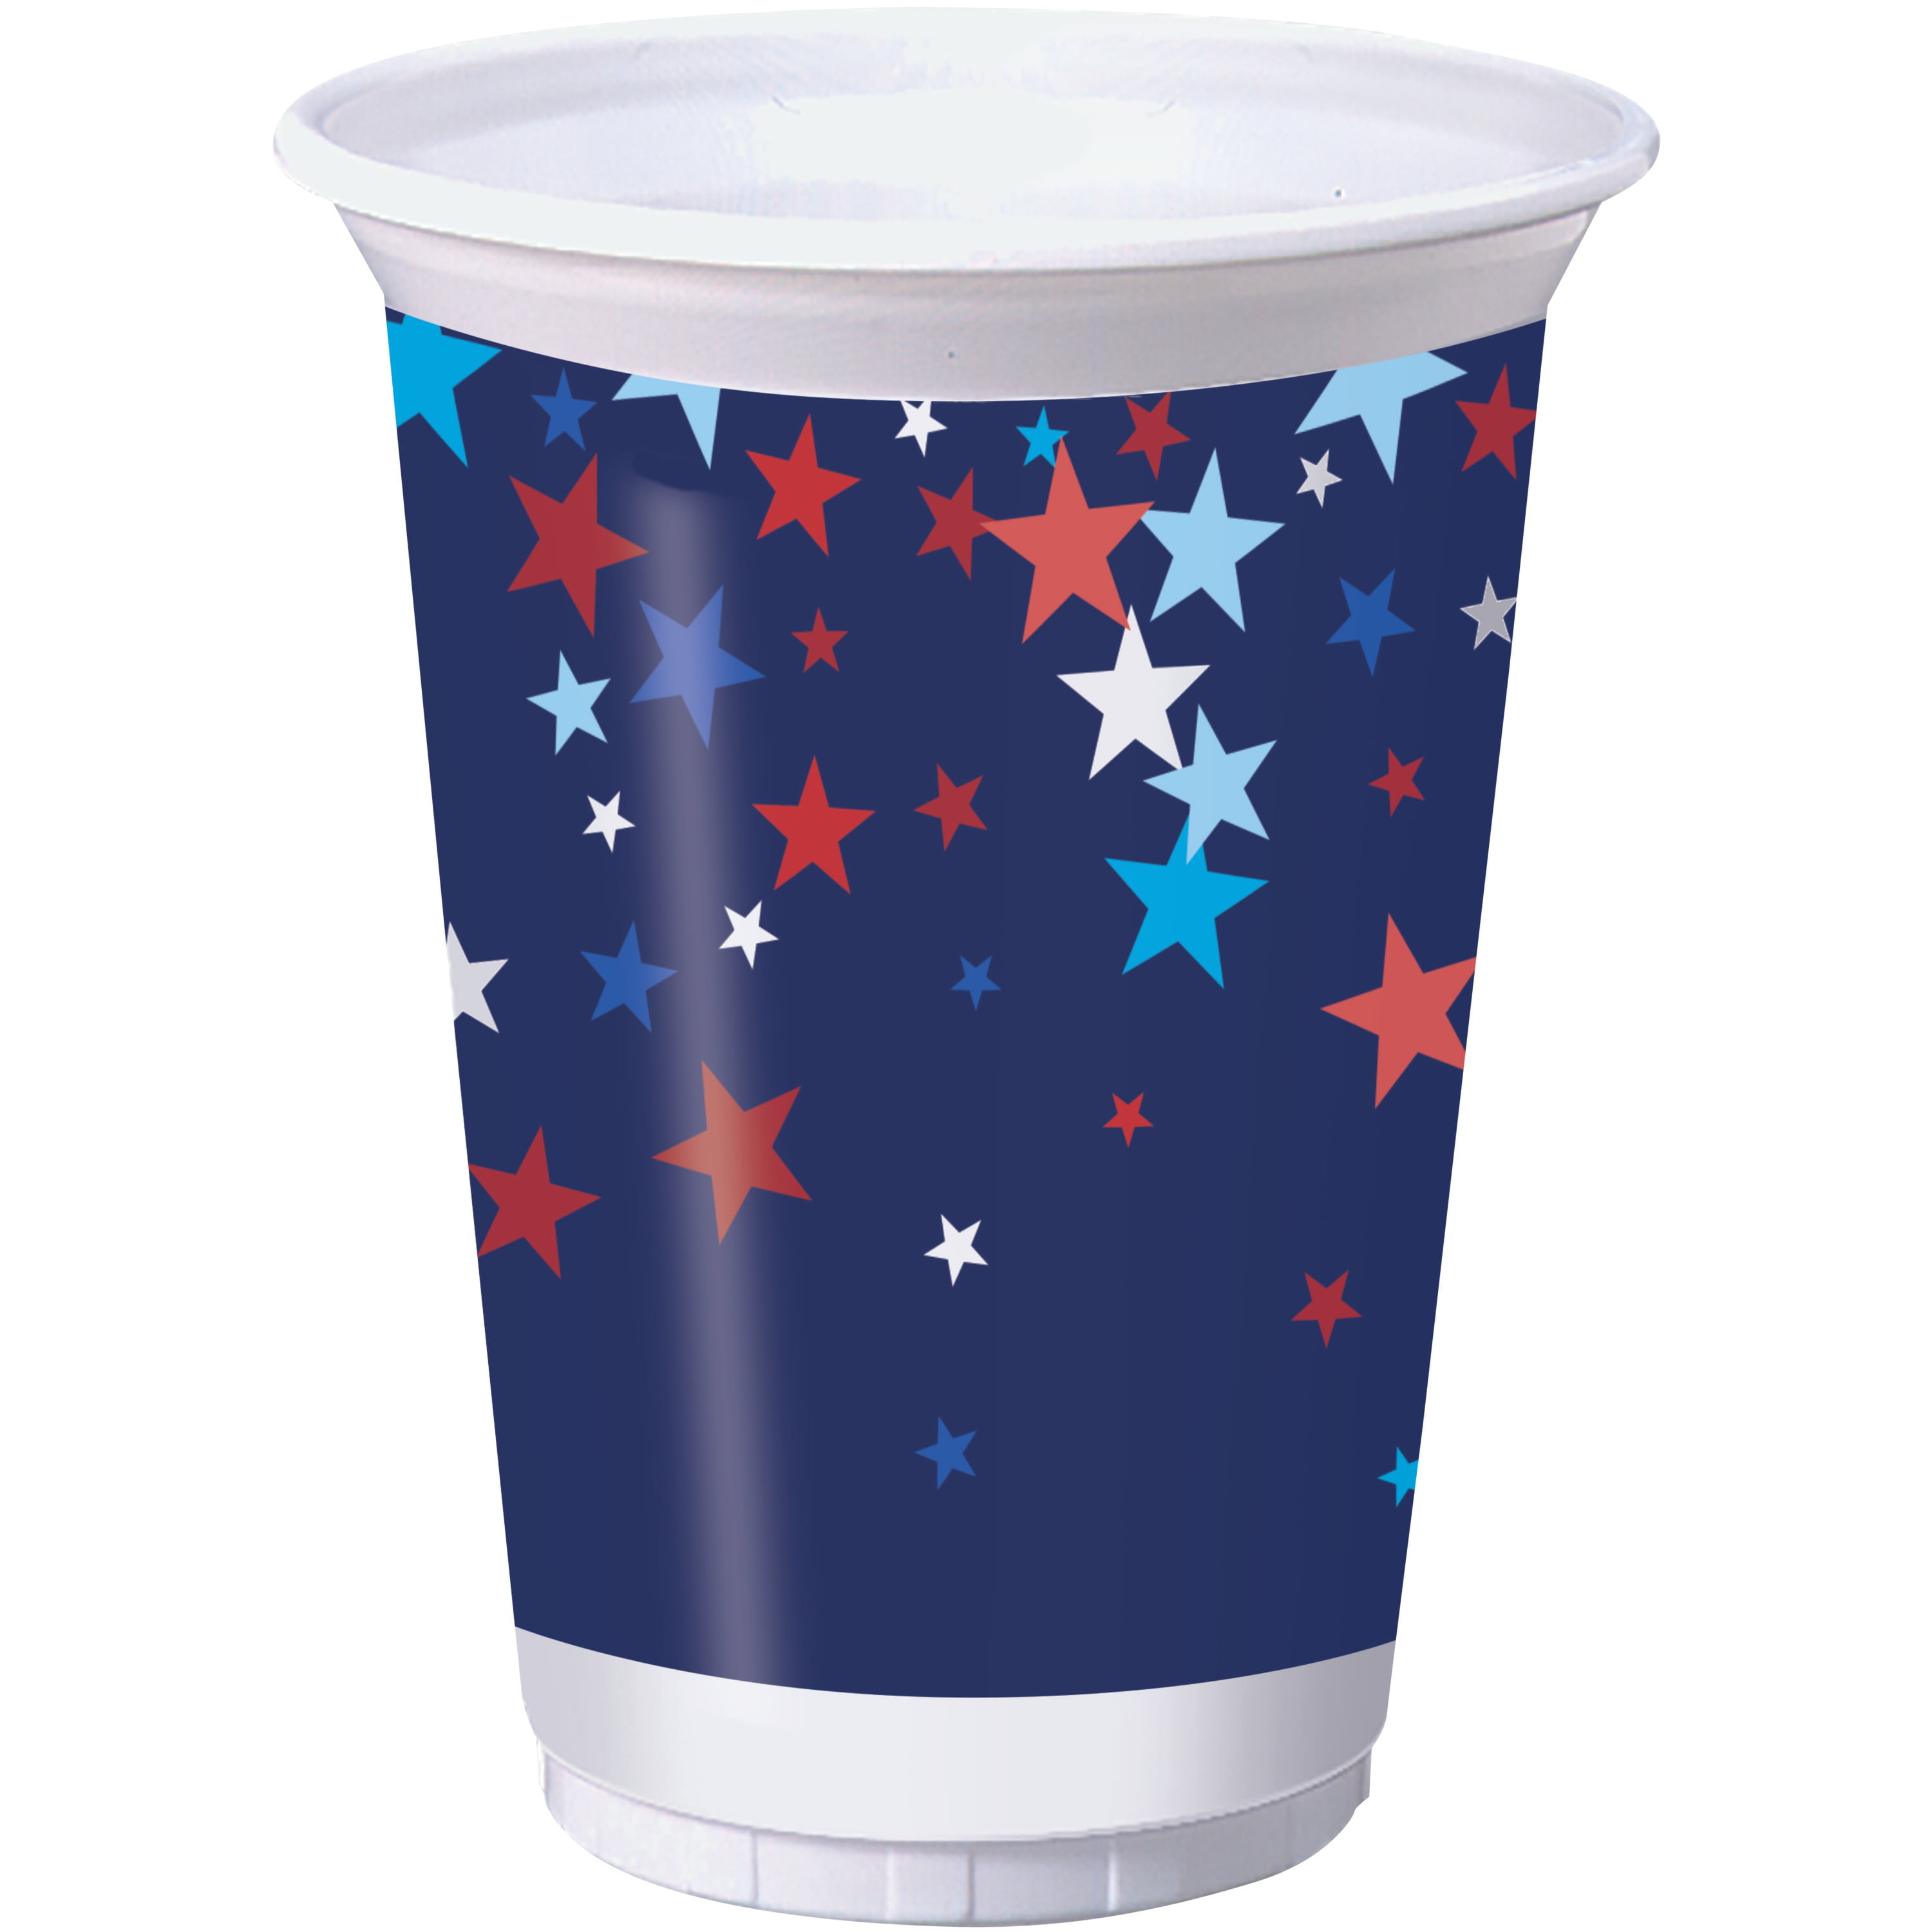 St Patrick's Day Starbucks Reusable Cup – Missy Sue & Co.